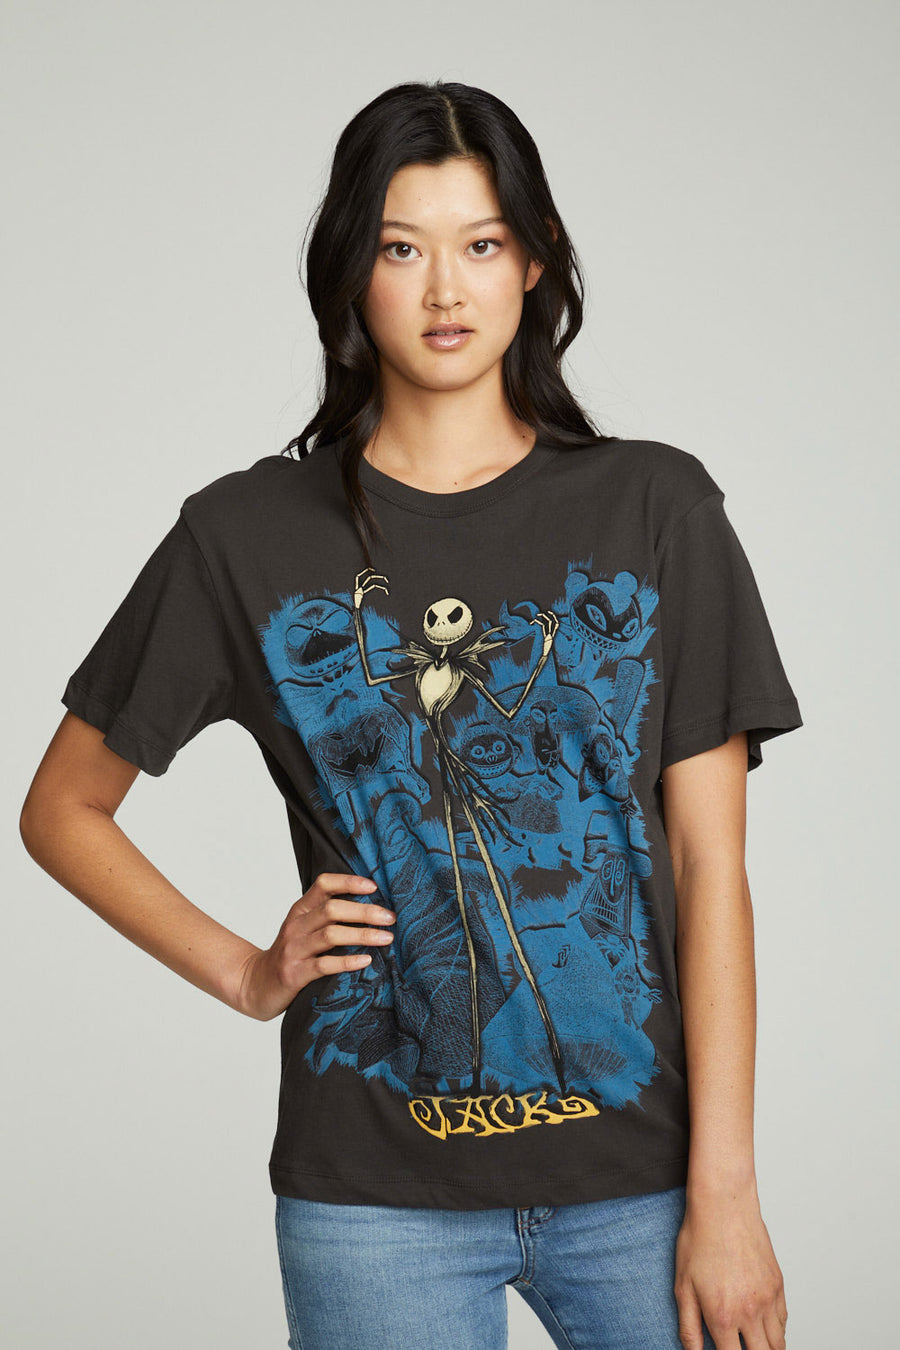 The Nightmare Before Christmas - Jack WOMENS chaserbrand